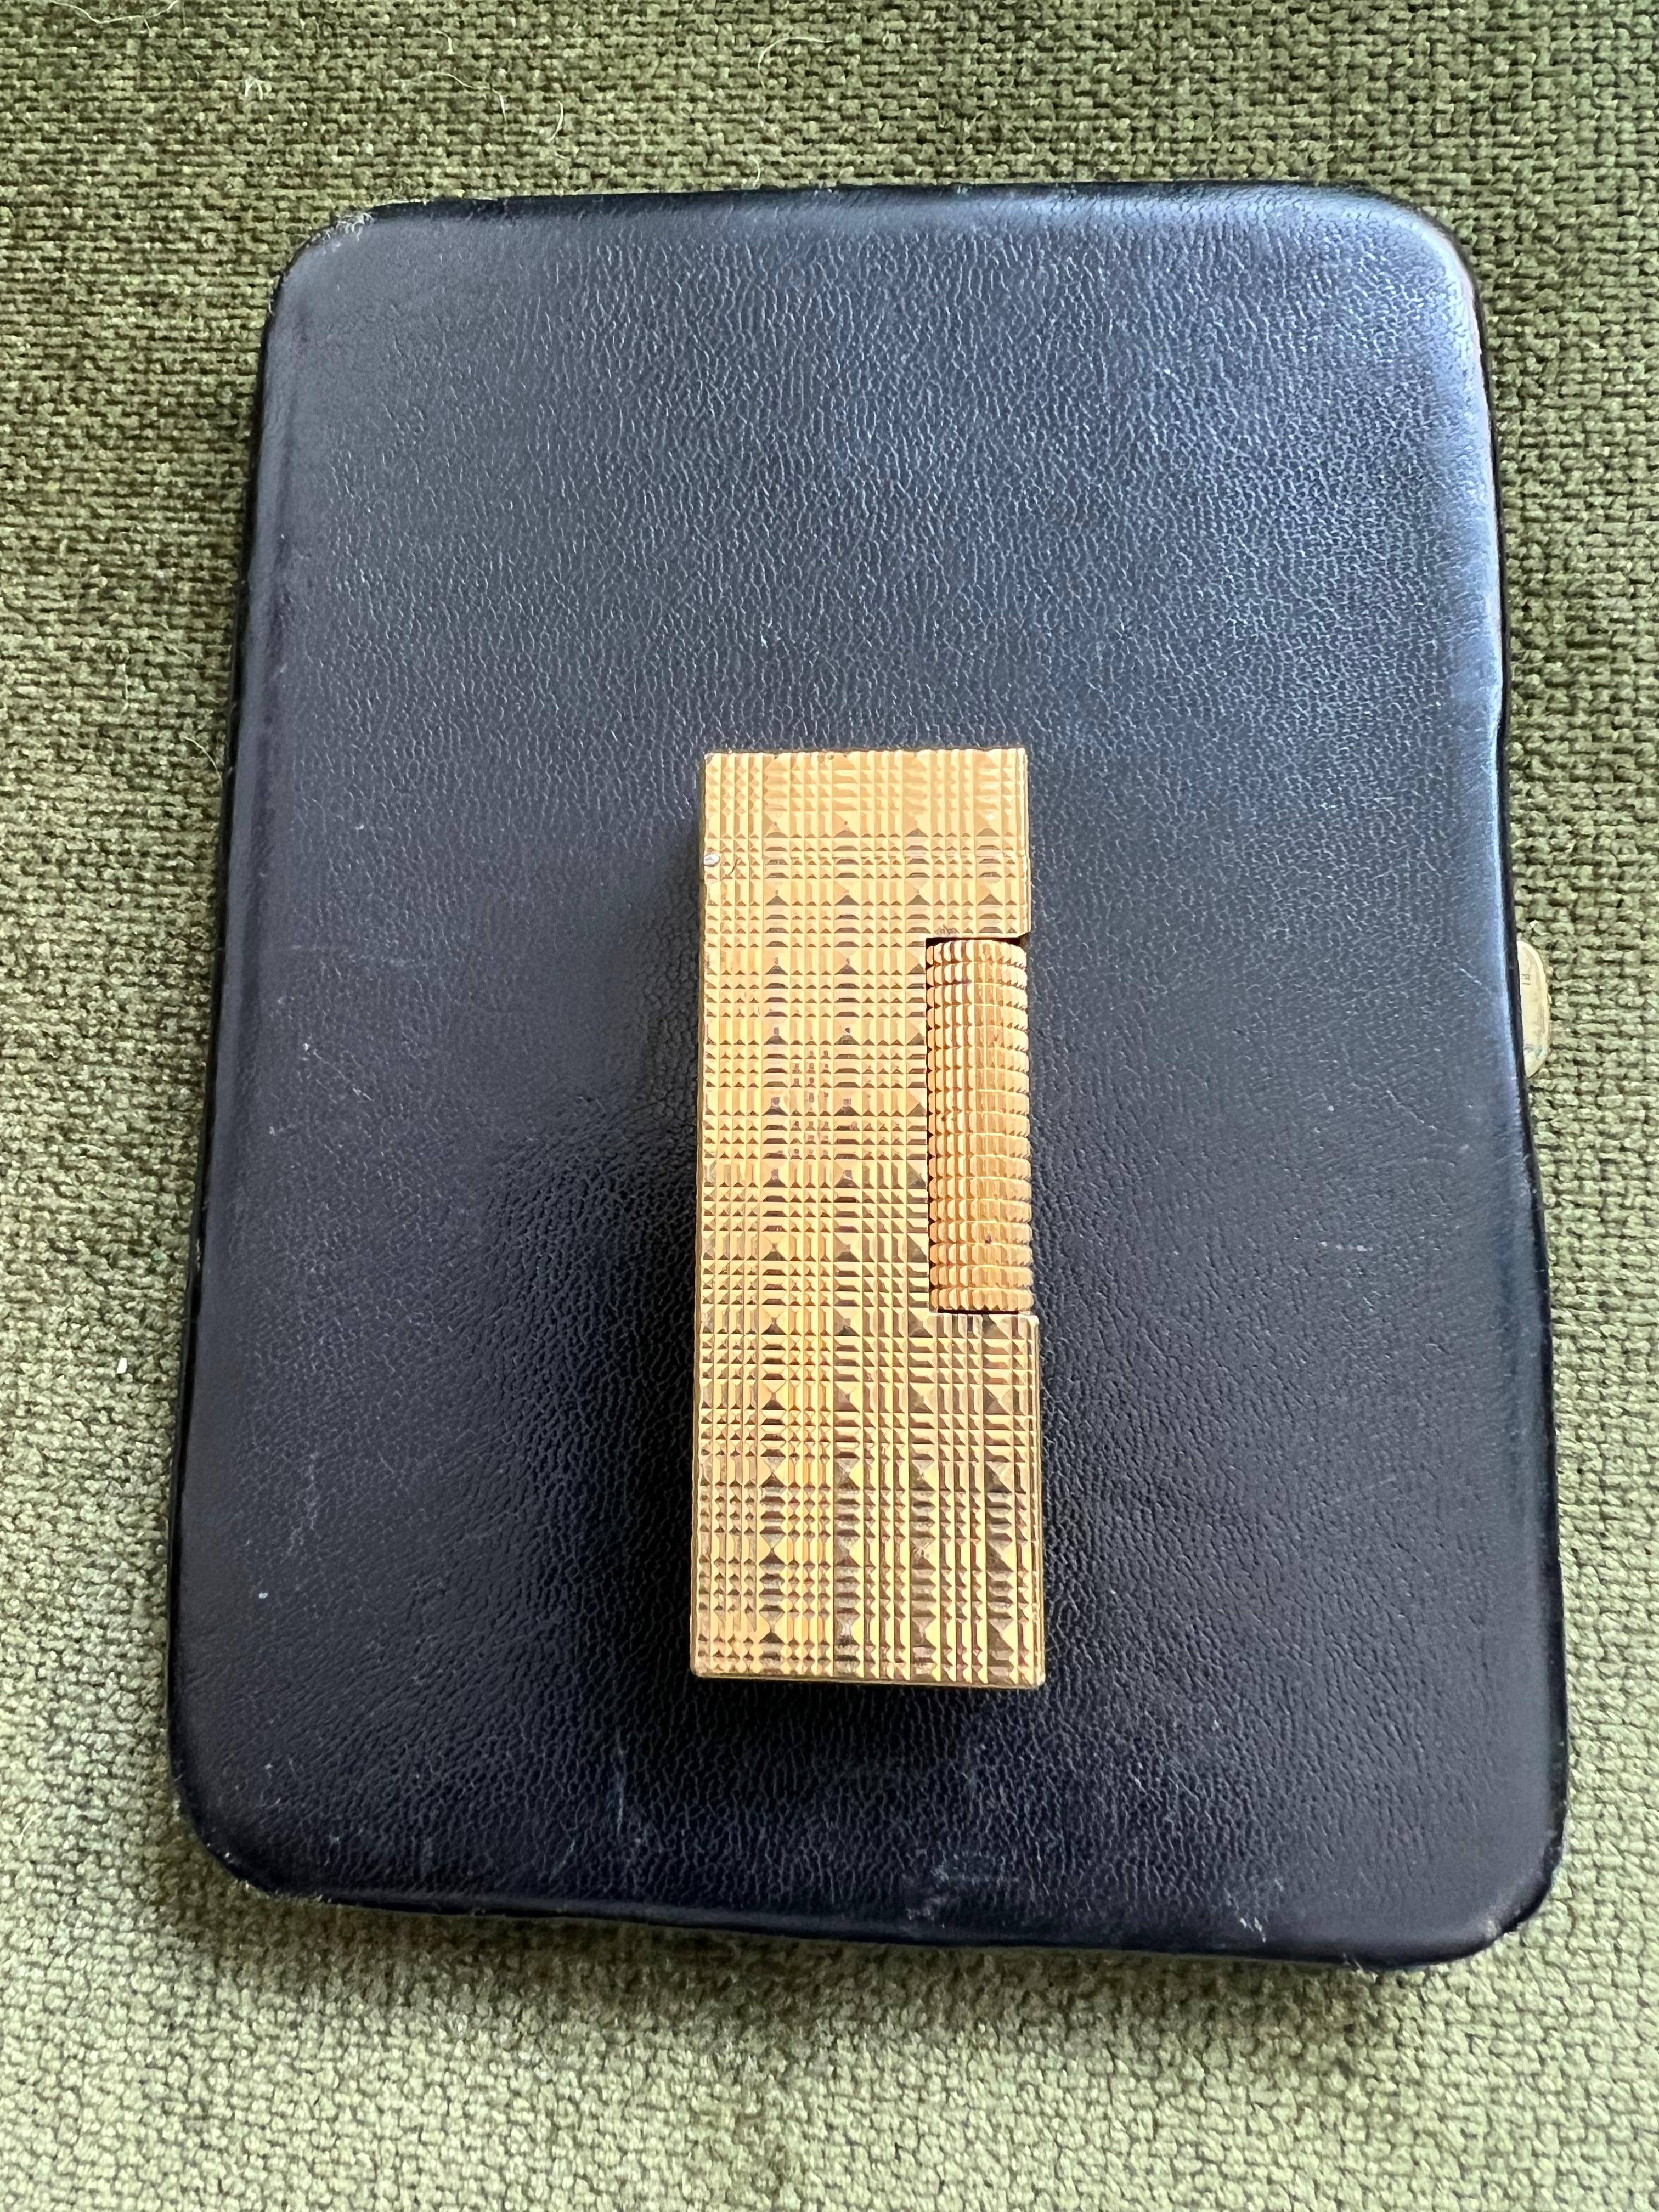 Dunhill Cigarette Case & Dunhill Gold Lighter Set, Vintage Circa 1970
The Cigarette case is made from hand made bound black lather with green satin interior. The case is in fantastic vintage wear condition. The clasp snaps to open and close.